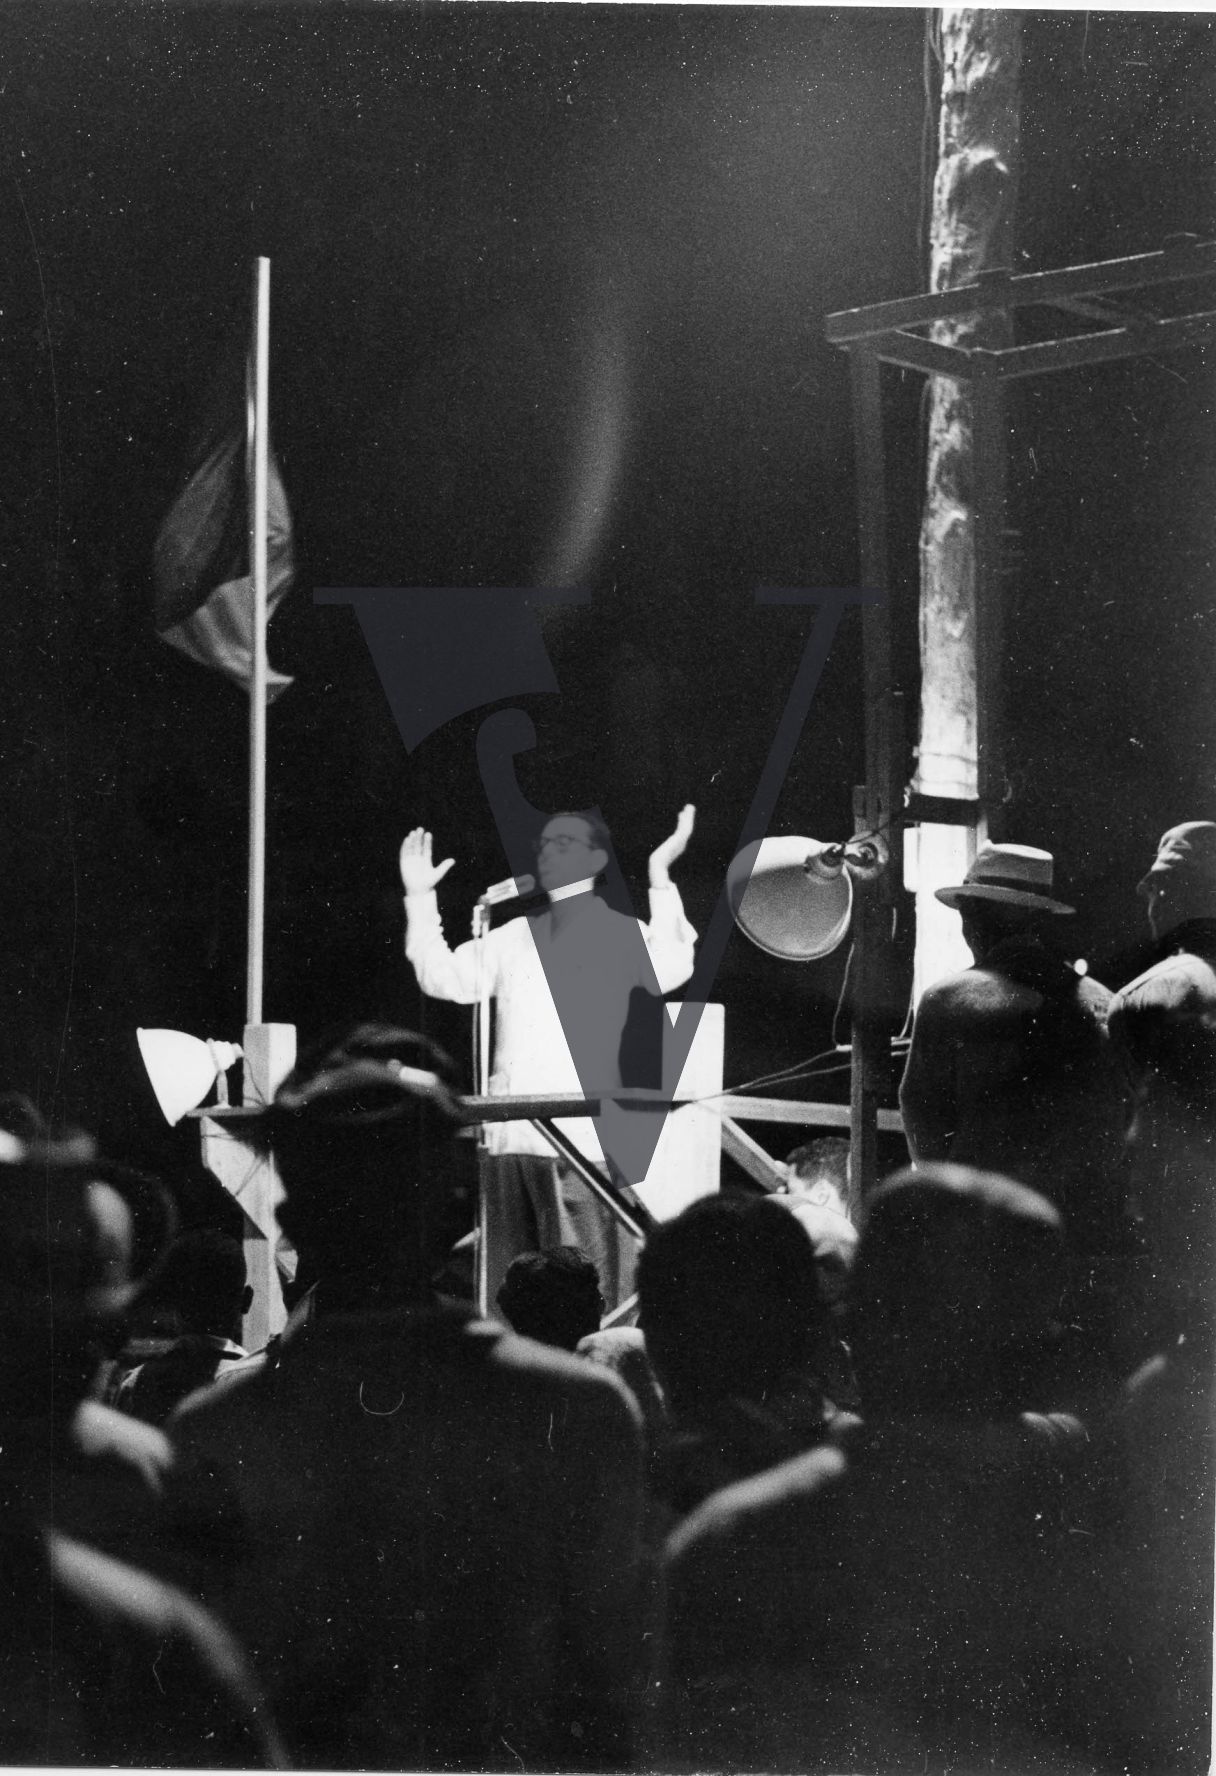 Belize, George Cadle Price, election meeting, on podium, in crowd.